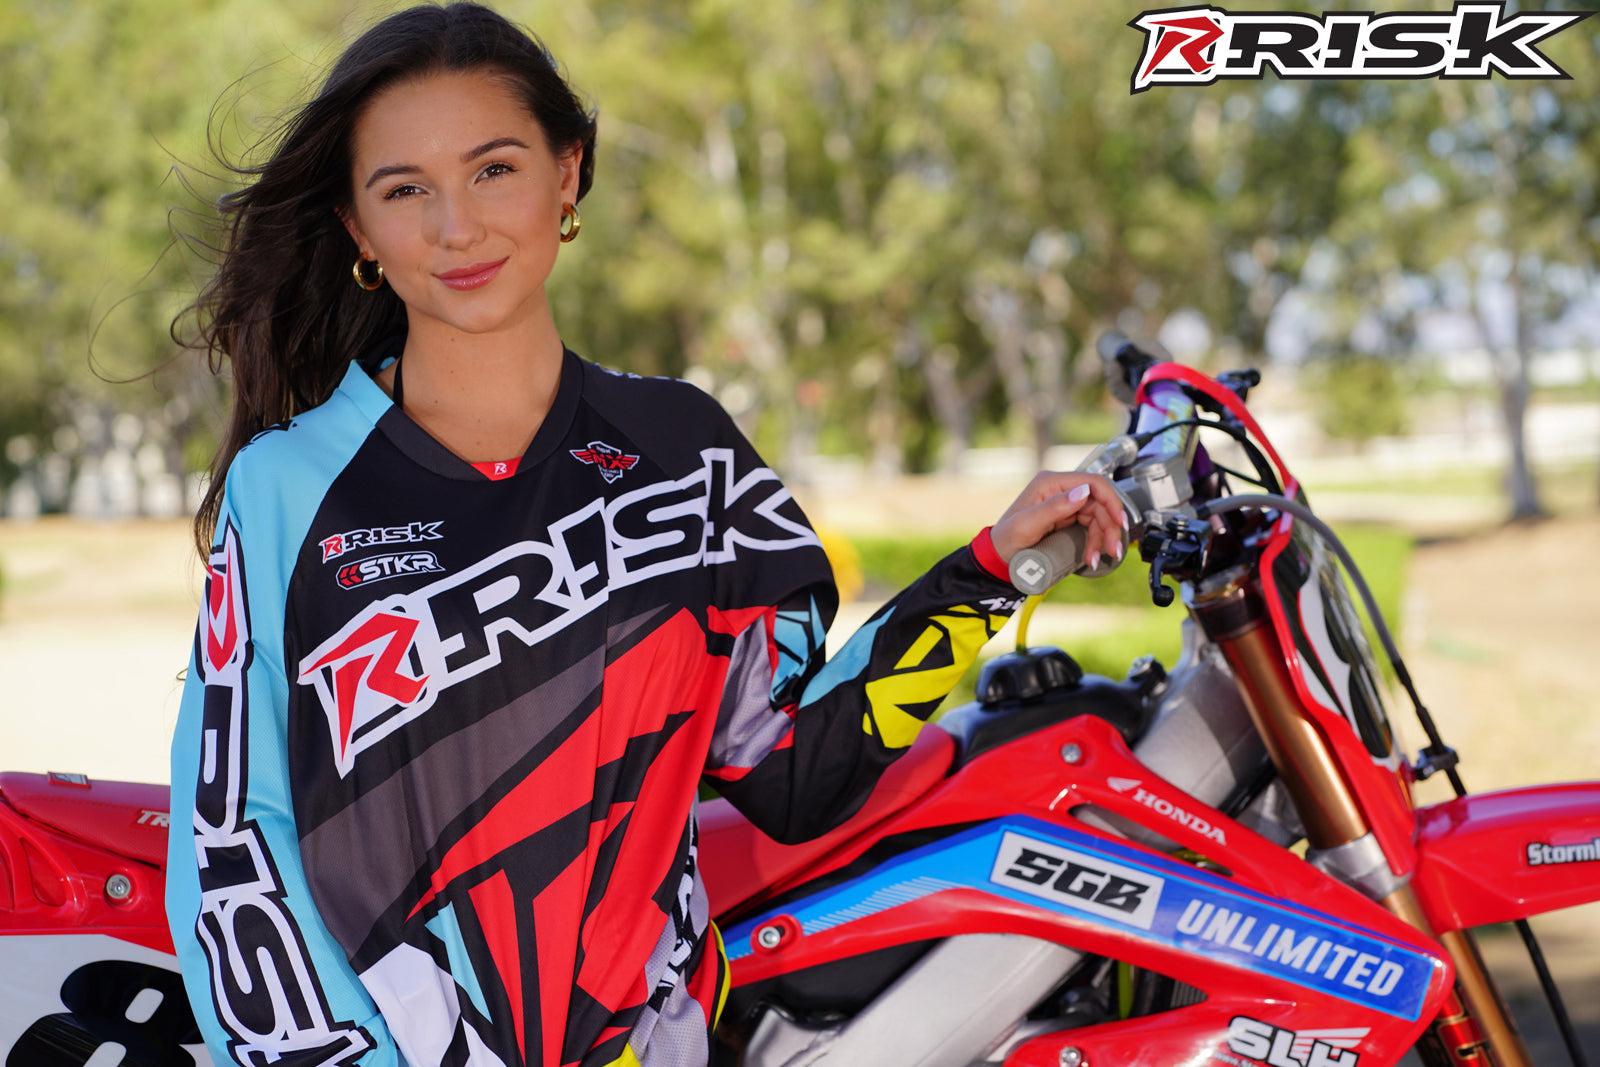 July's Risk Racing Moto Model Samantha Heady posing in various bikinis & Risk Racing Jerseys next to Alex Ray's Honda CR250R that's sidding on a Risk Racing ATS stand - Pose #3